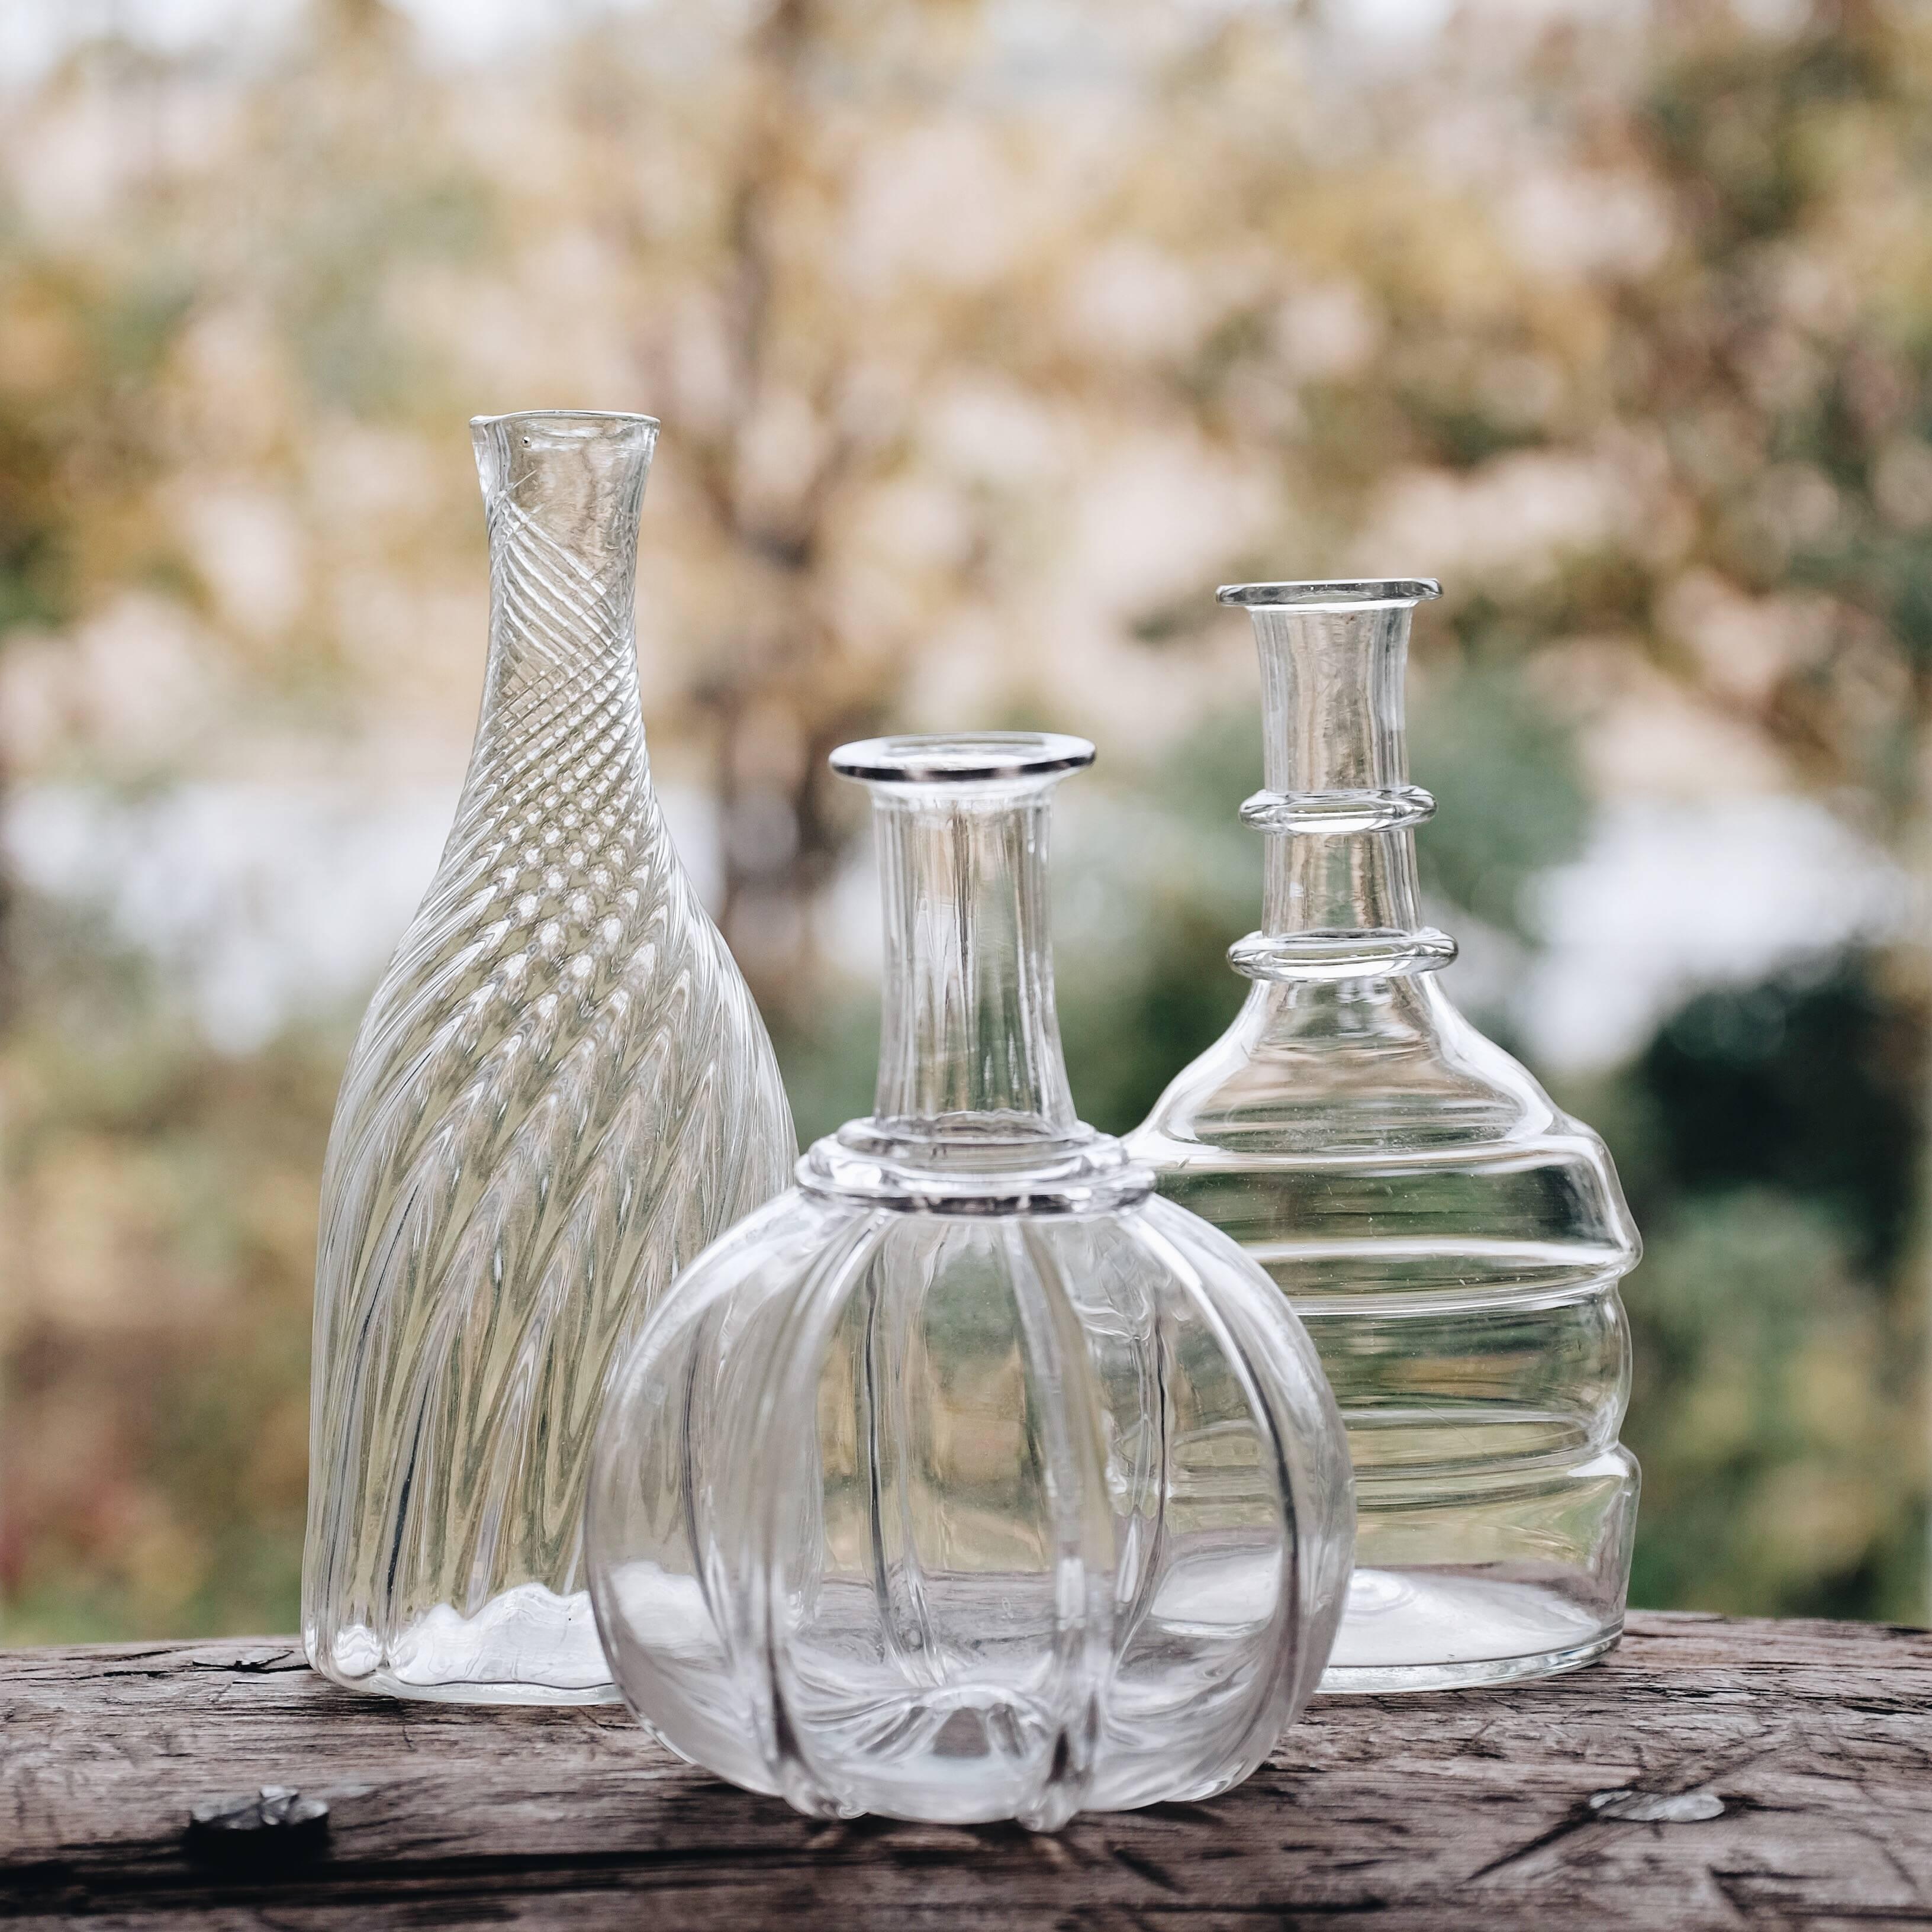 Collection of Swedish 19th century decanters in different sizes. Sold as collection only. Nr 1 - H 26.5 D 11 cm, Nr 2 - H 20 D 14 cm, Nr 3 - H 23 D 10.5 cm. 
 
Condition: Good
Wear: Wear consistent with age and use
Finish: Original 
Year: Ca